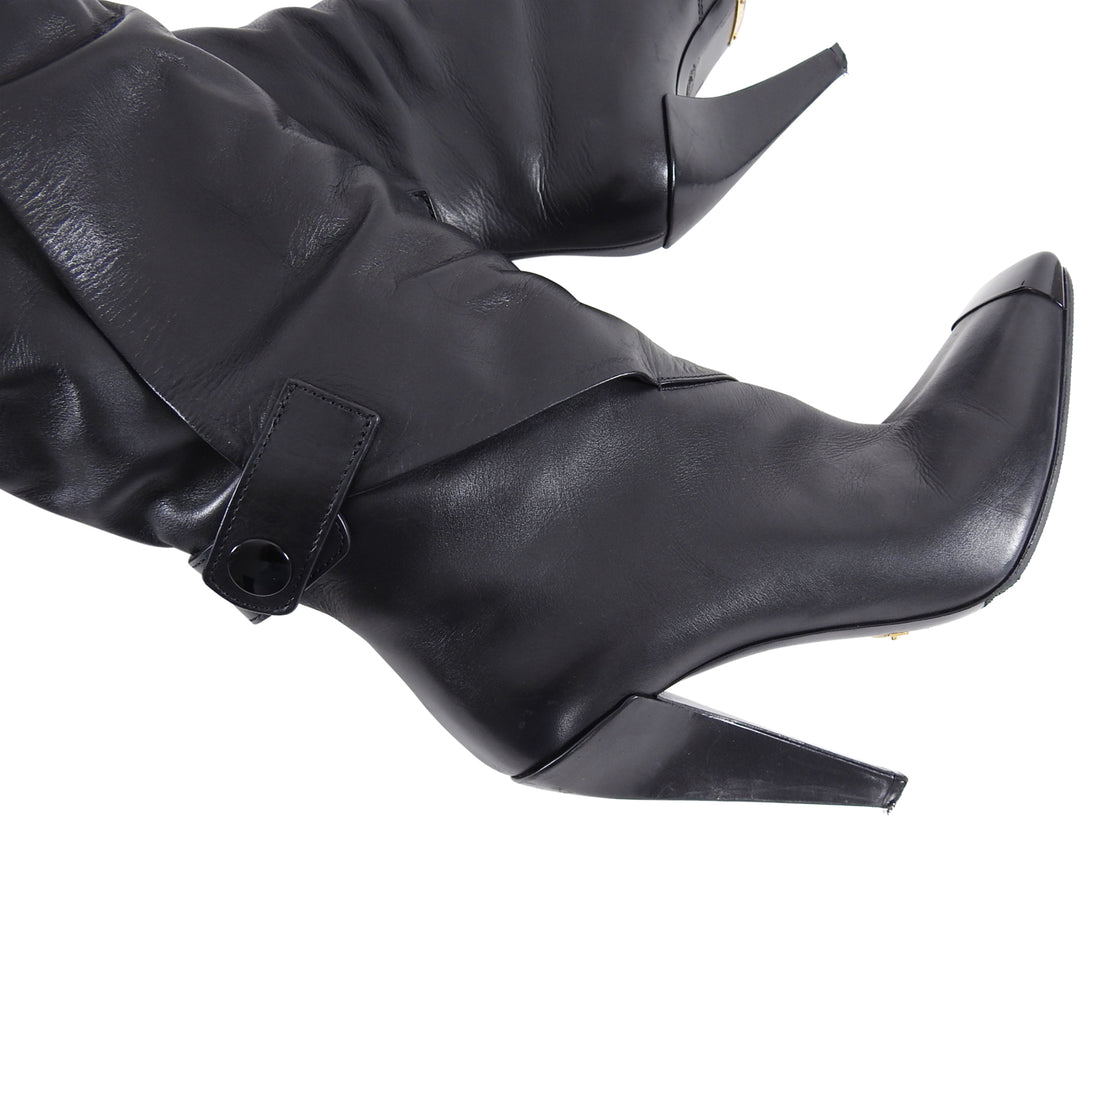 Tom Ford Black Over the Knee Black Leather Boots  - 40.5